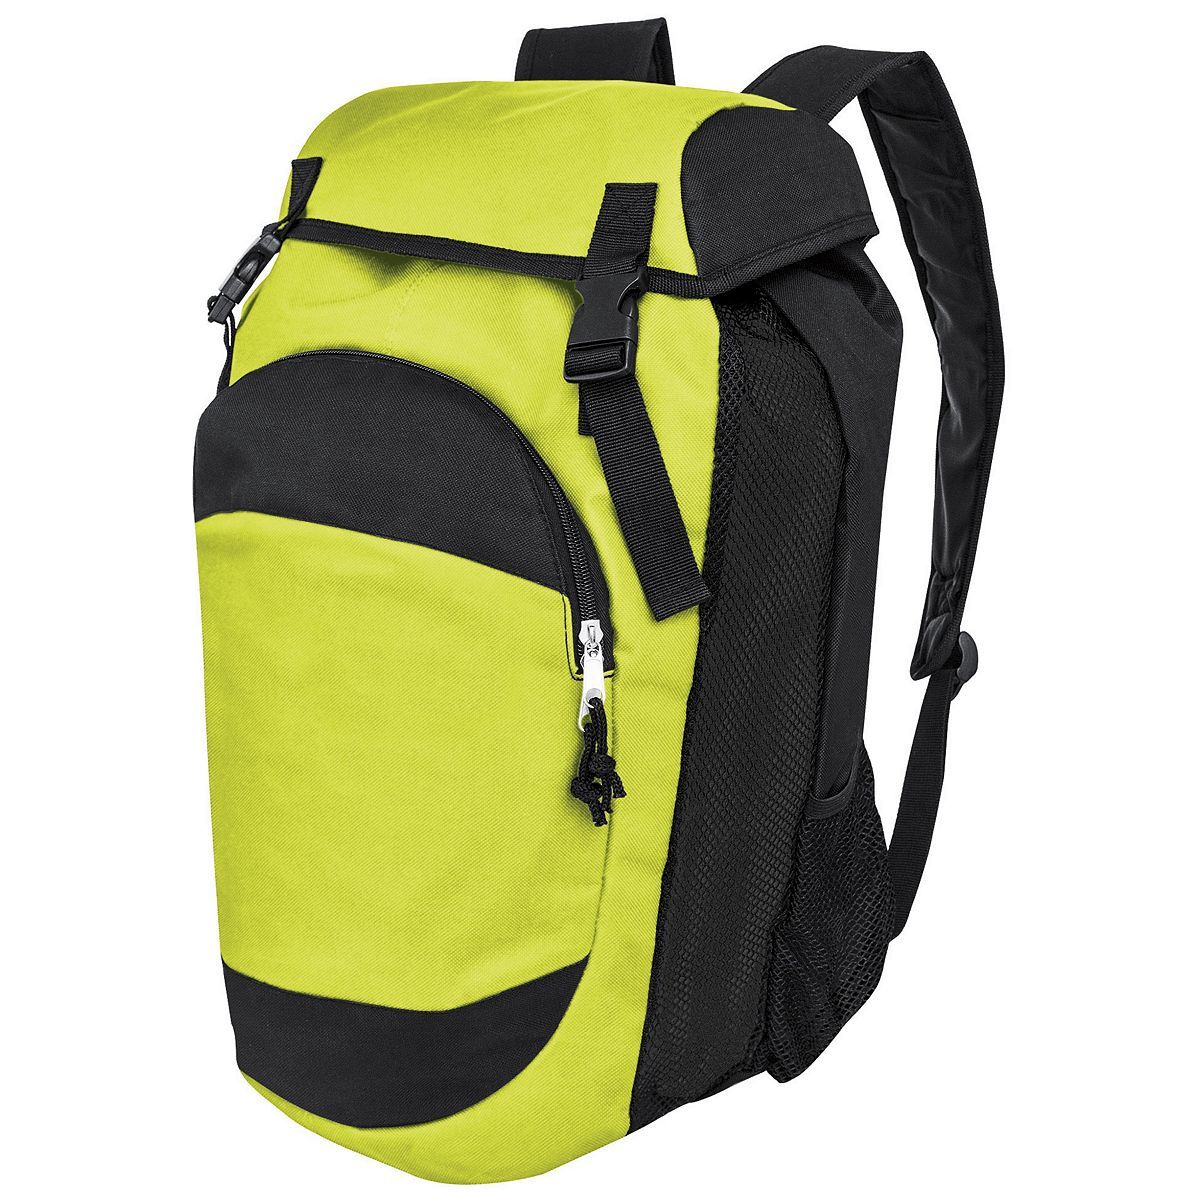 MBG057 Takeoff Backpack / 11.8 x 16.9 x 5.5 inches – Hpass168